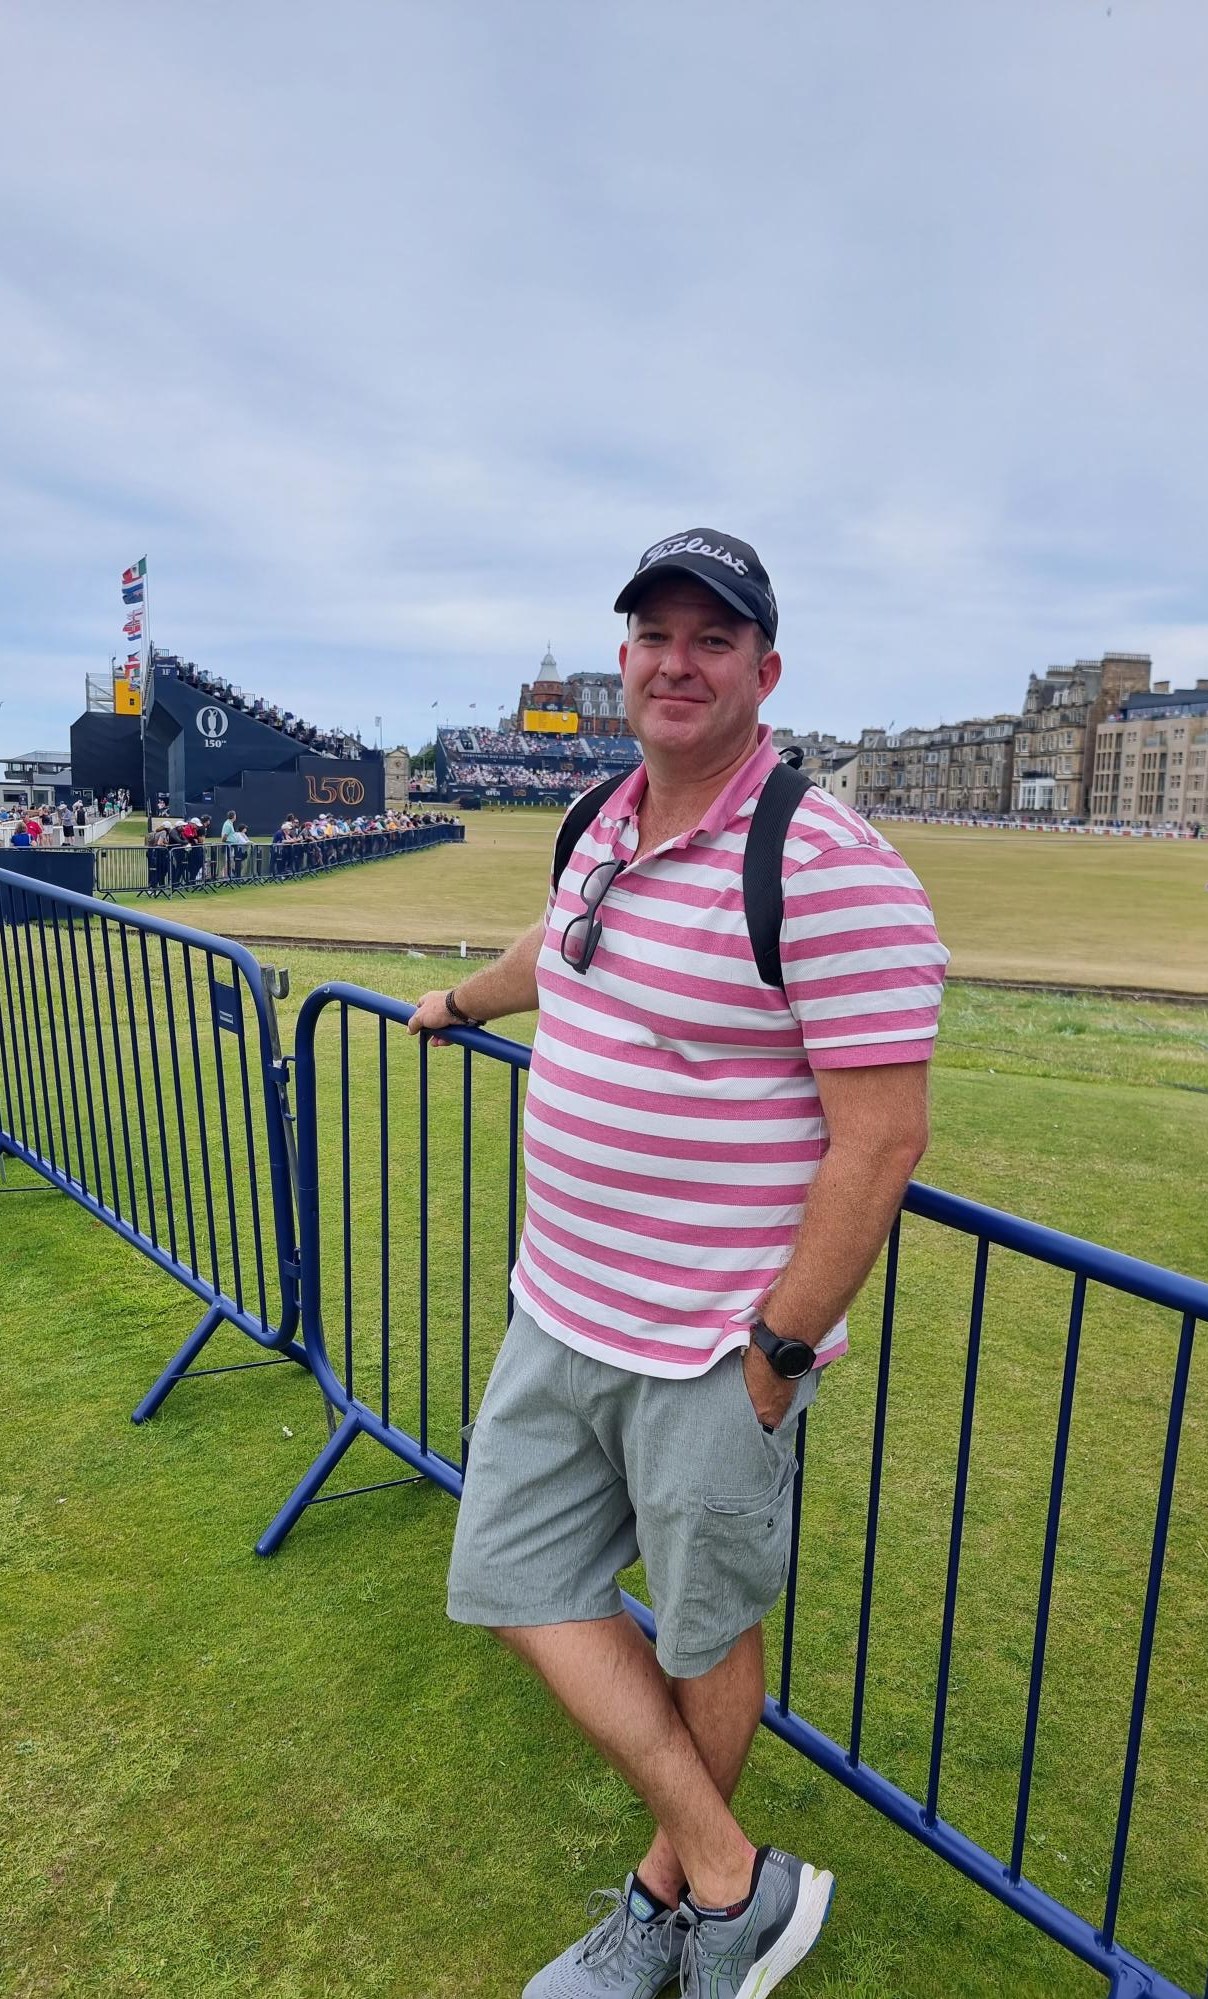 Anthony at the British Open in St Andrews with the 1st and 18th holes in the background. Image supplied.